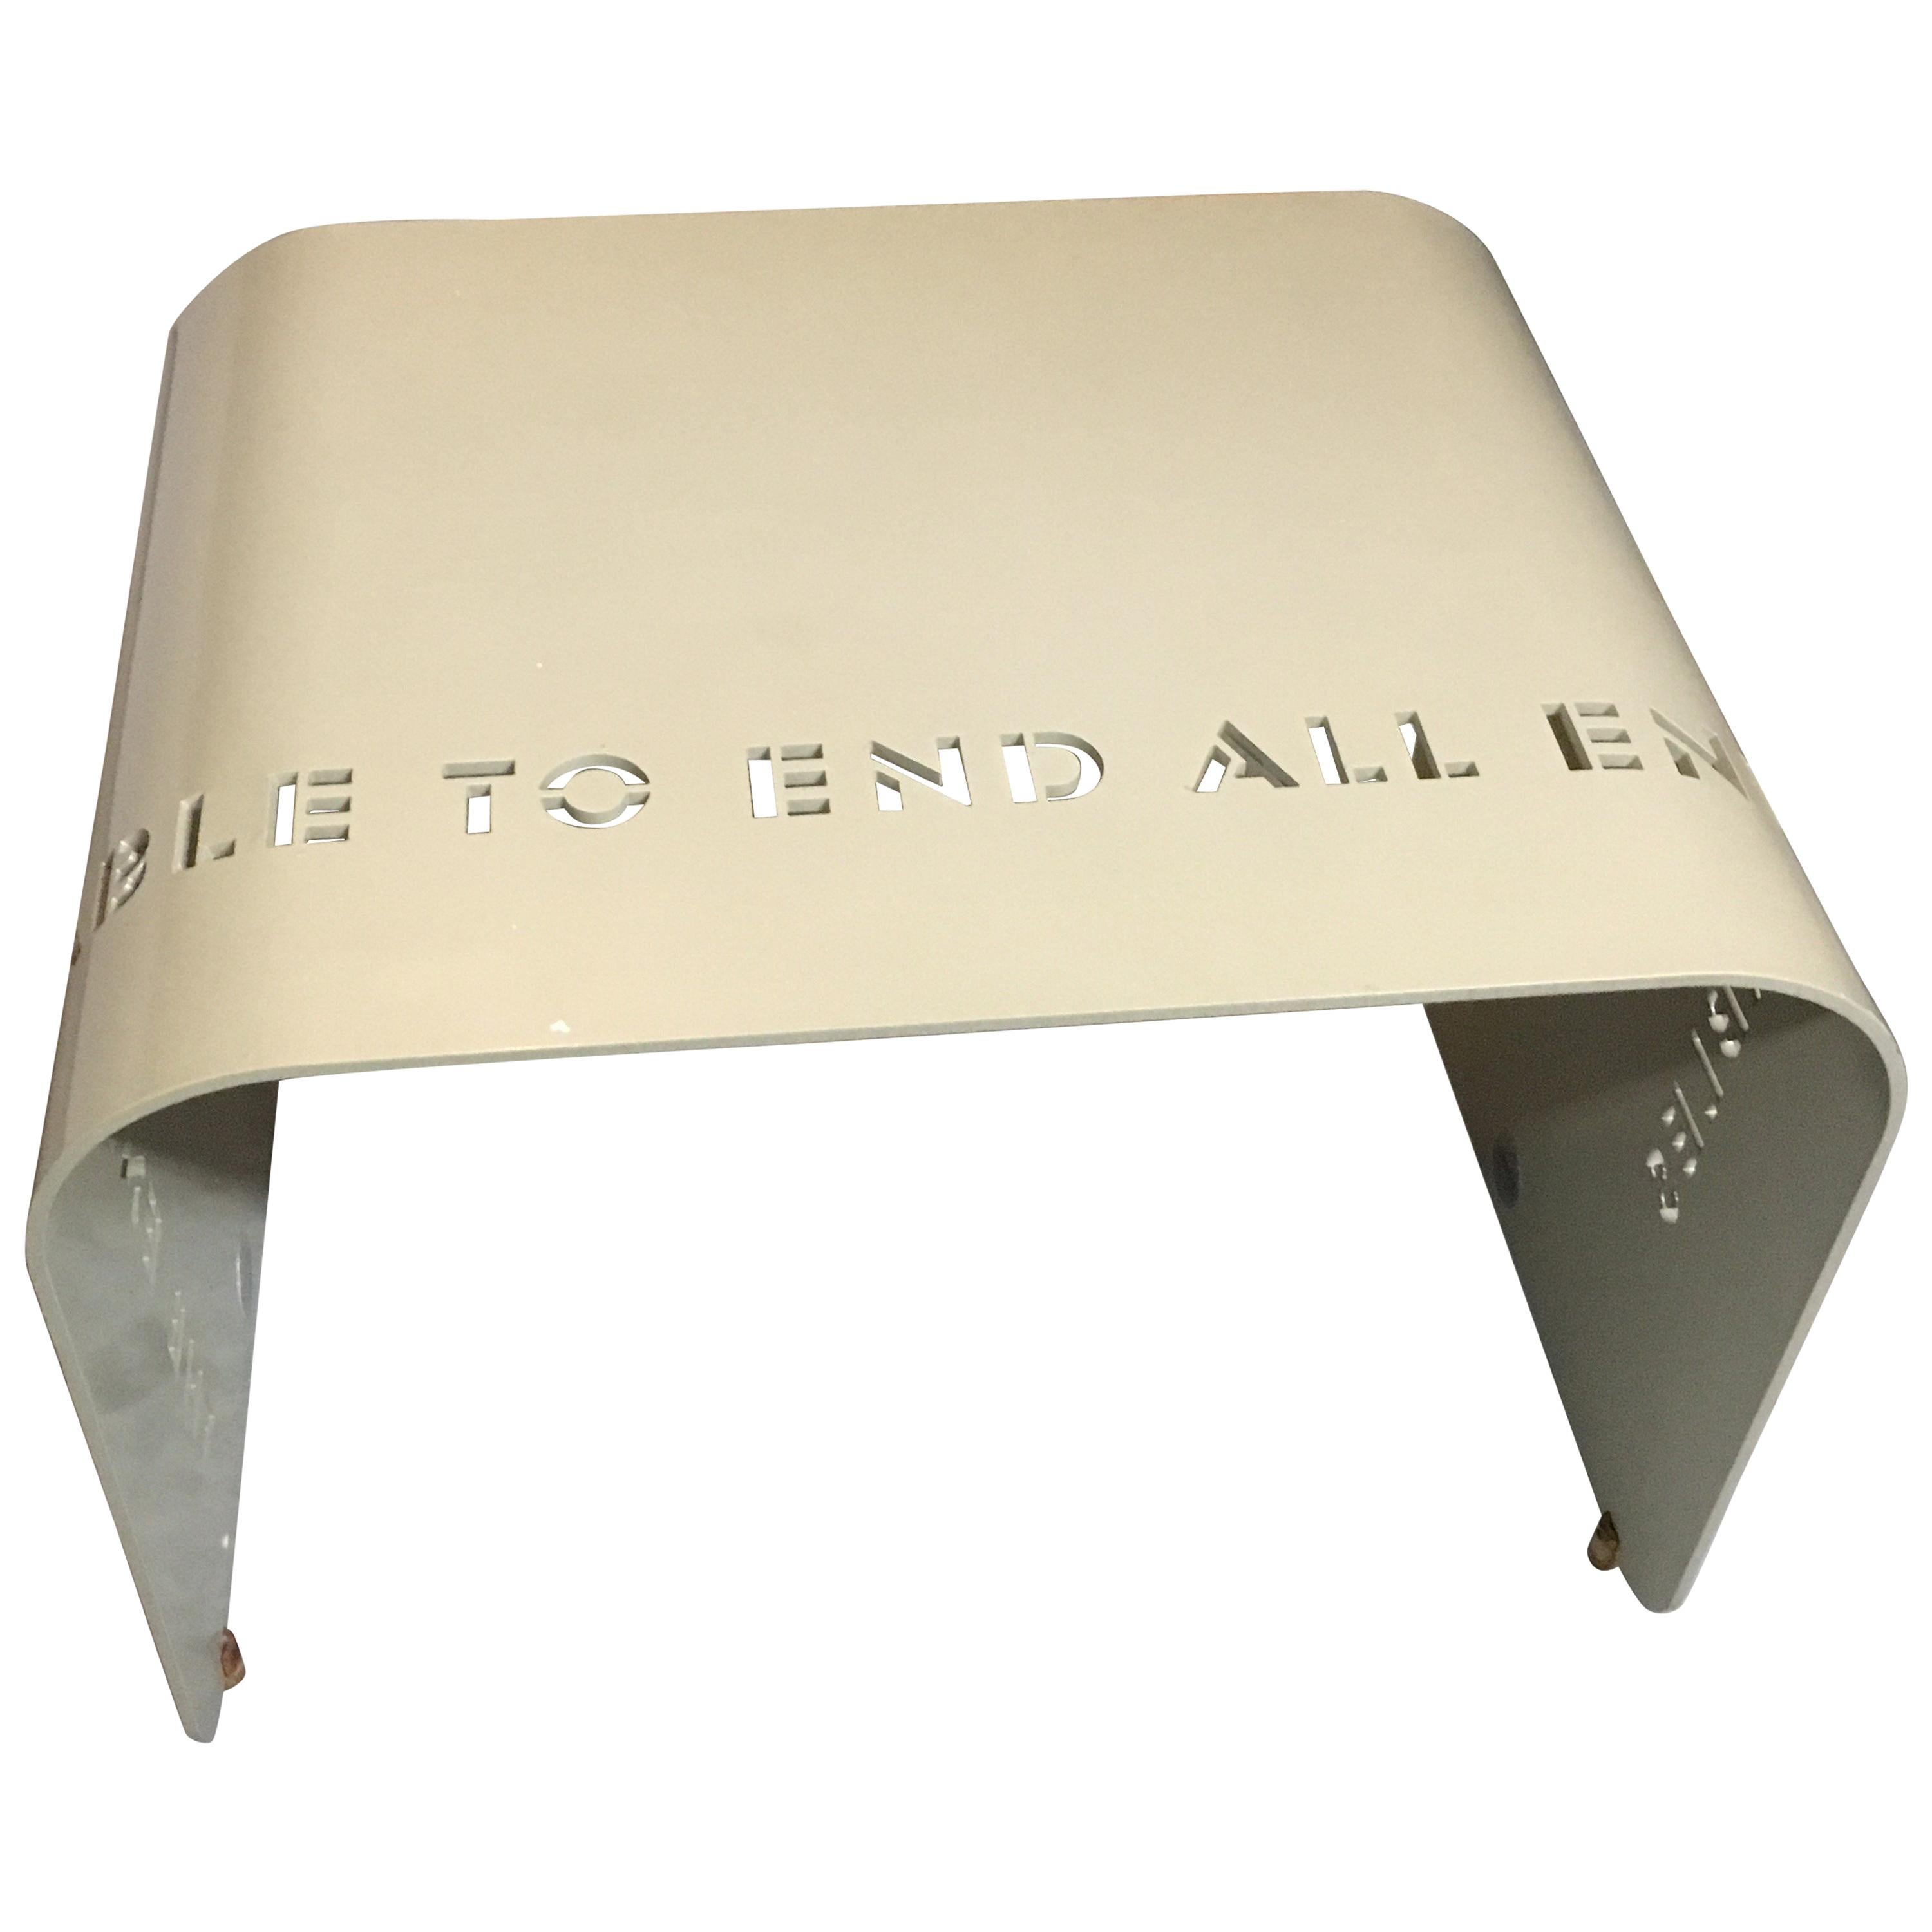 Milton Glaser Epigram Short Bench "The End Table to End All End Tables"